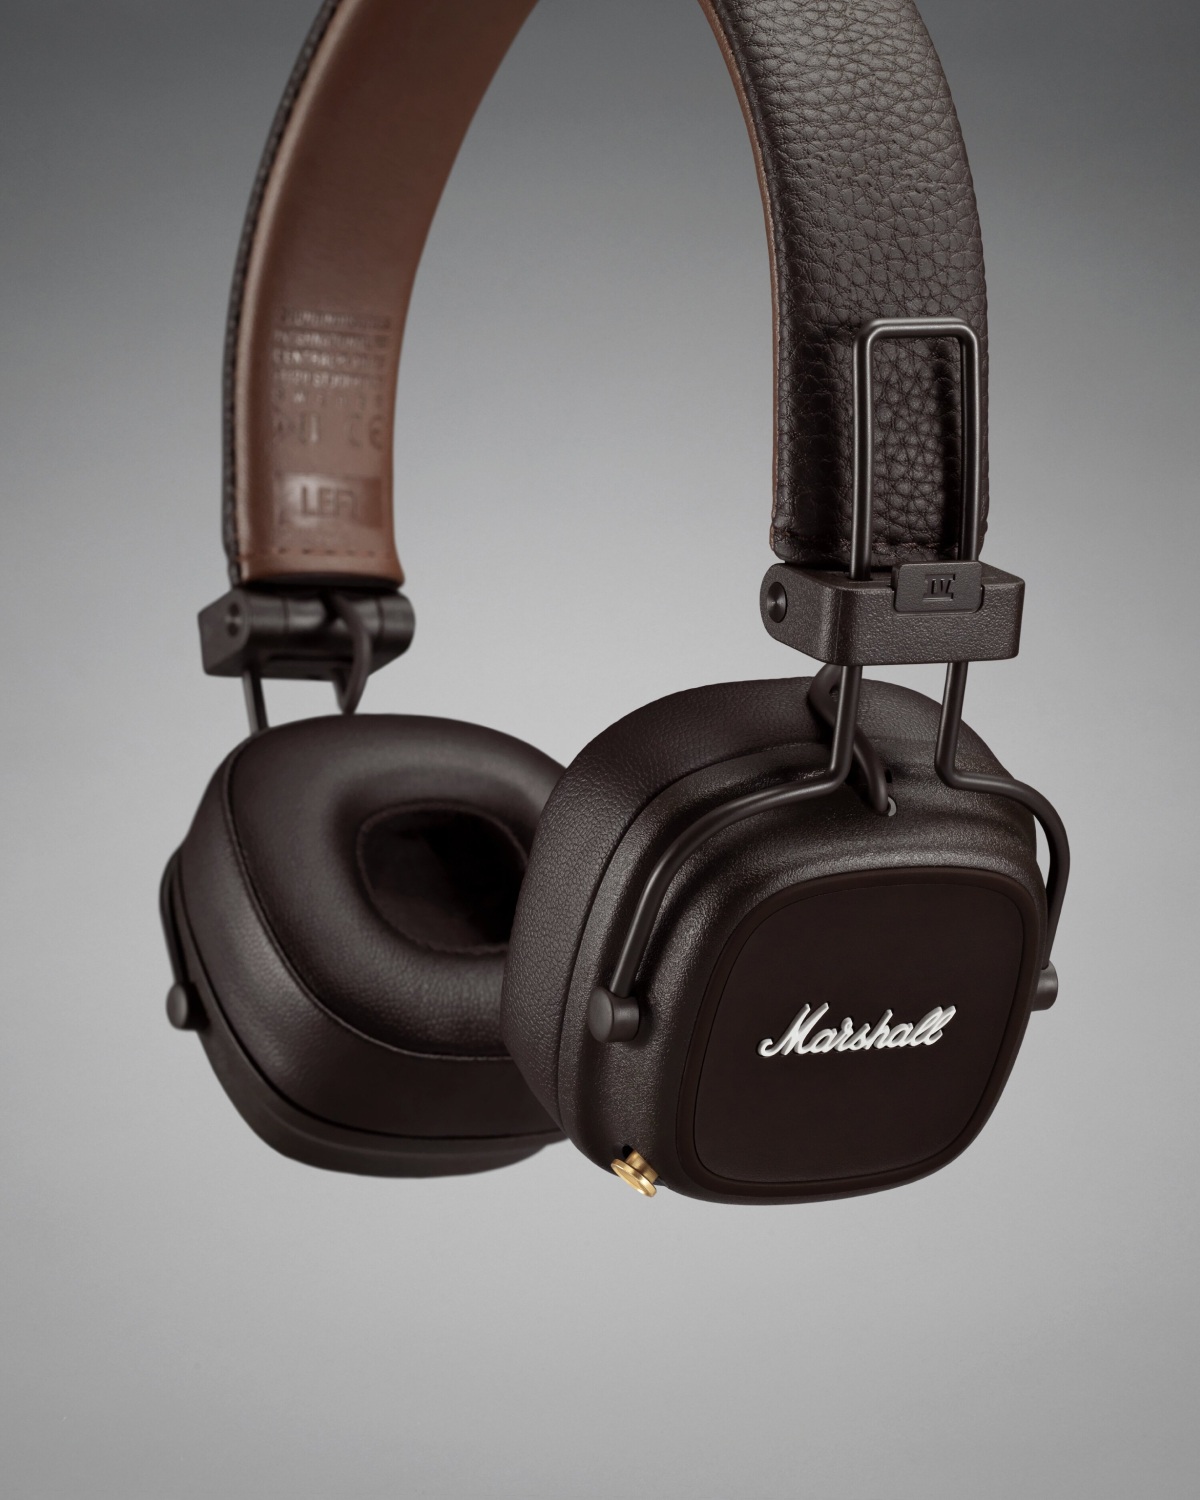 Marshall MAJOR IV headphones with leather straps combine style and quality sound. 